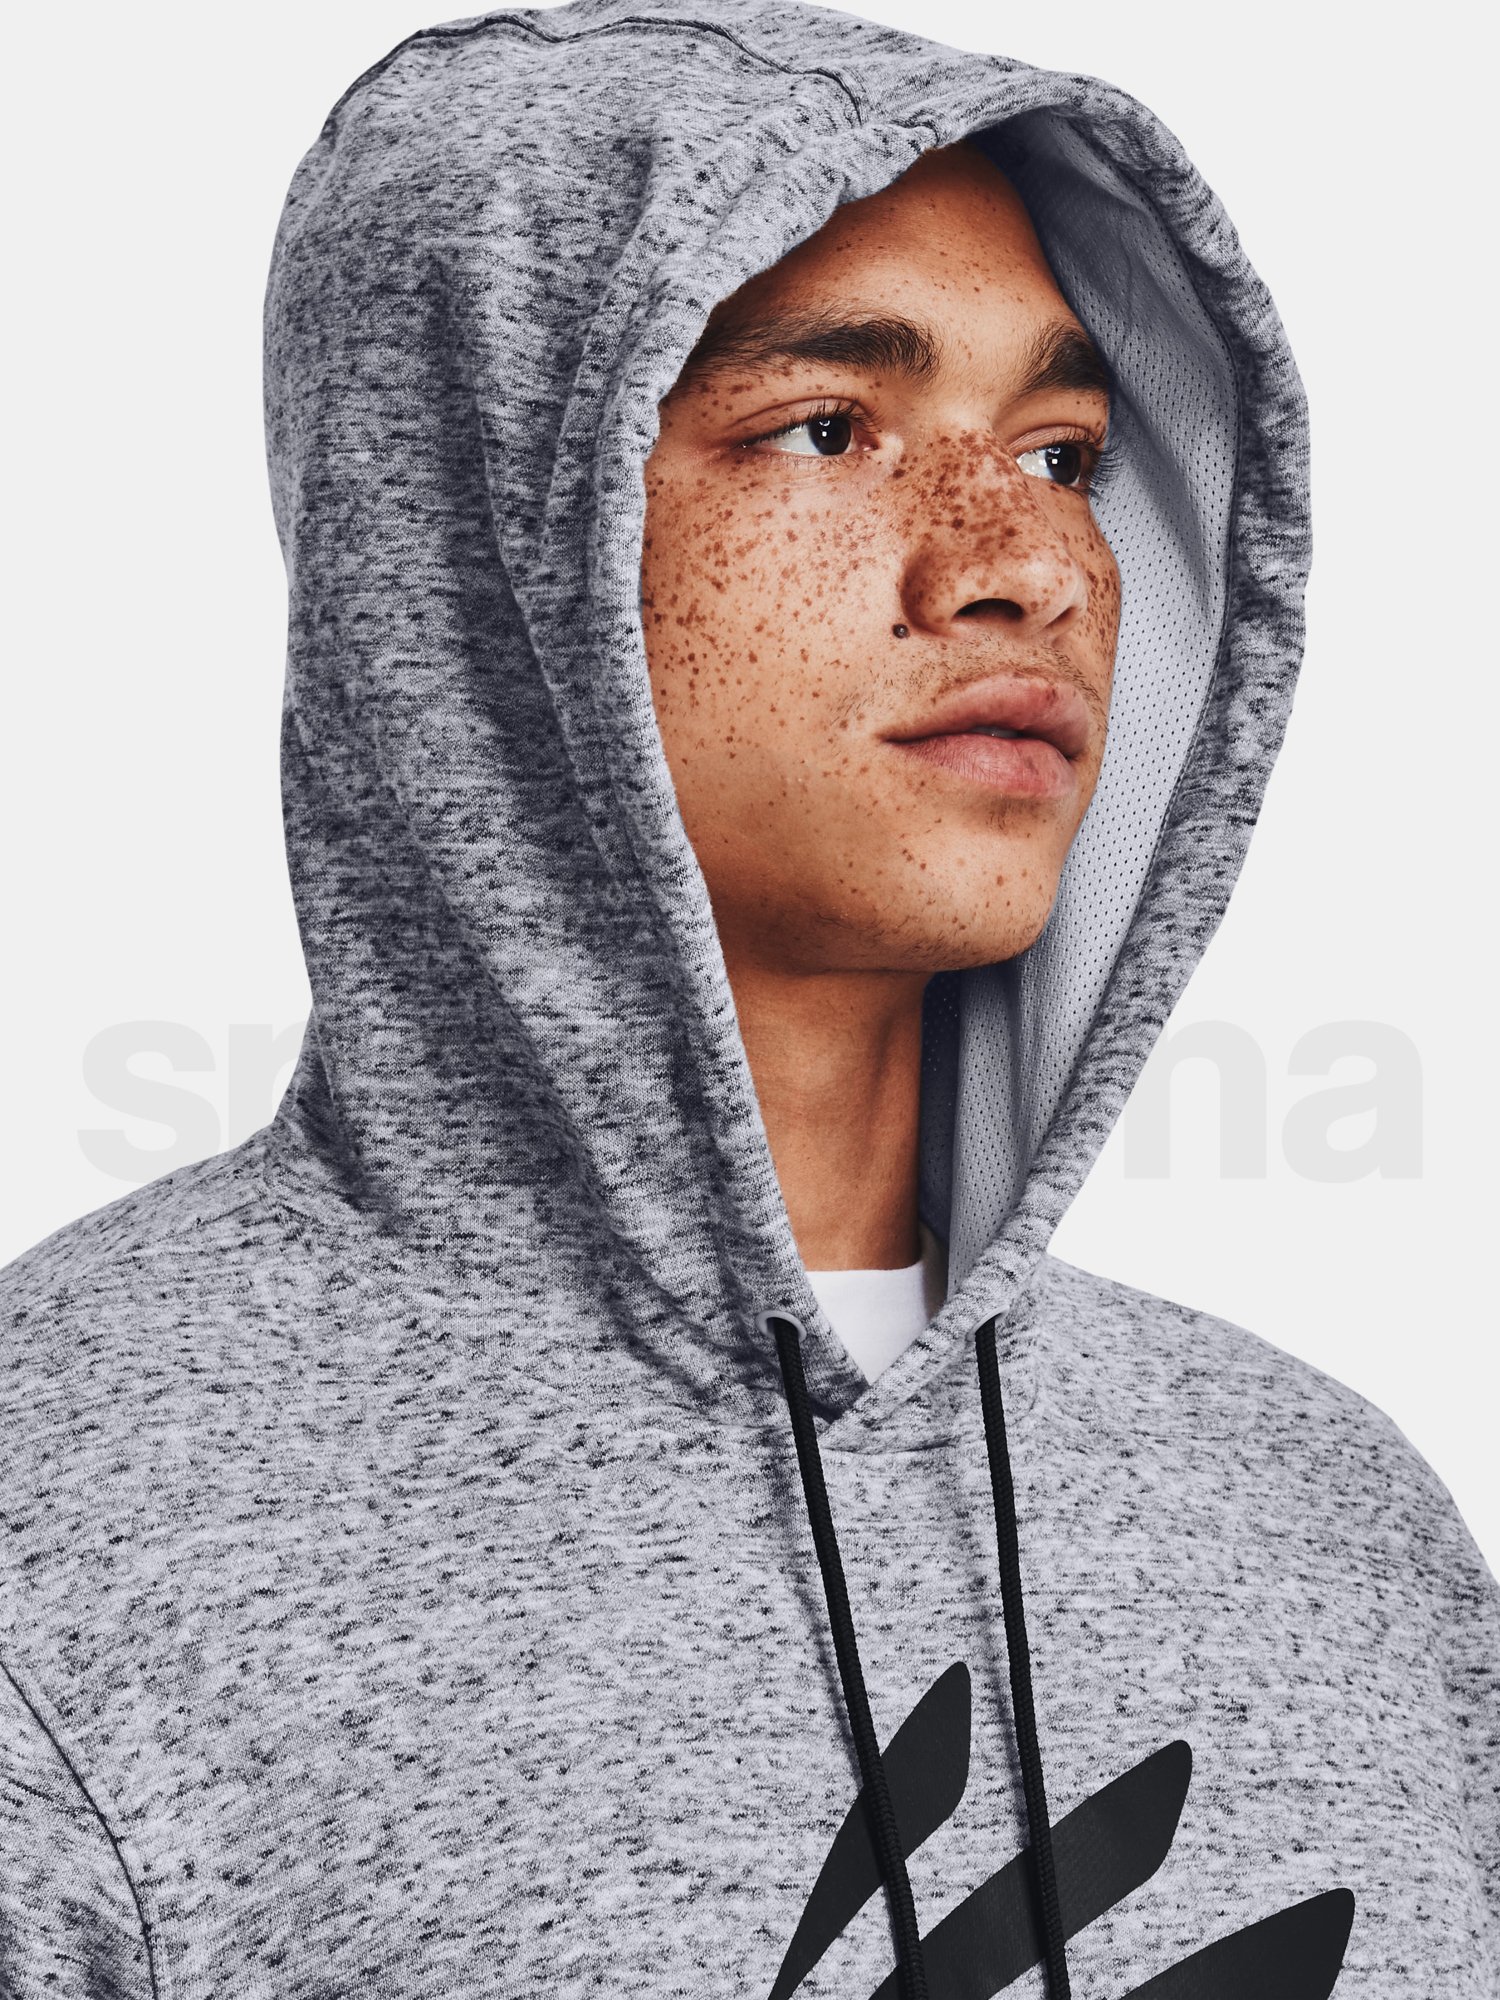 Mikina Under Armour CURRY PULLOVER HOOD-GRY